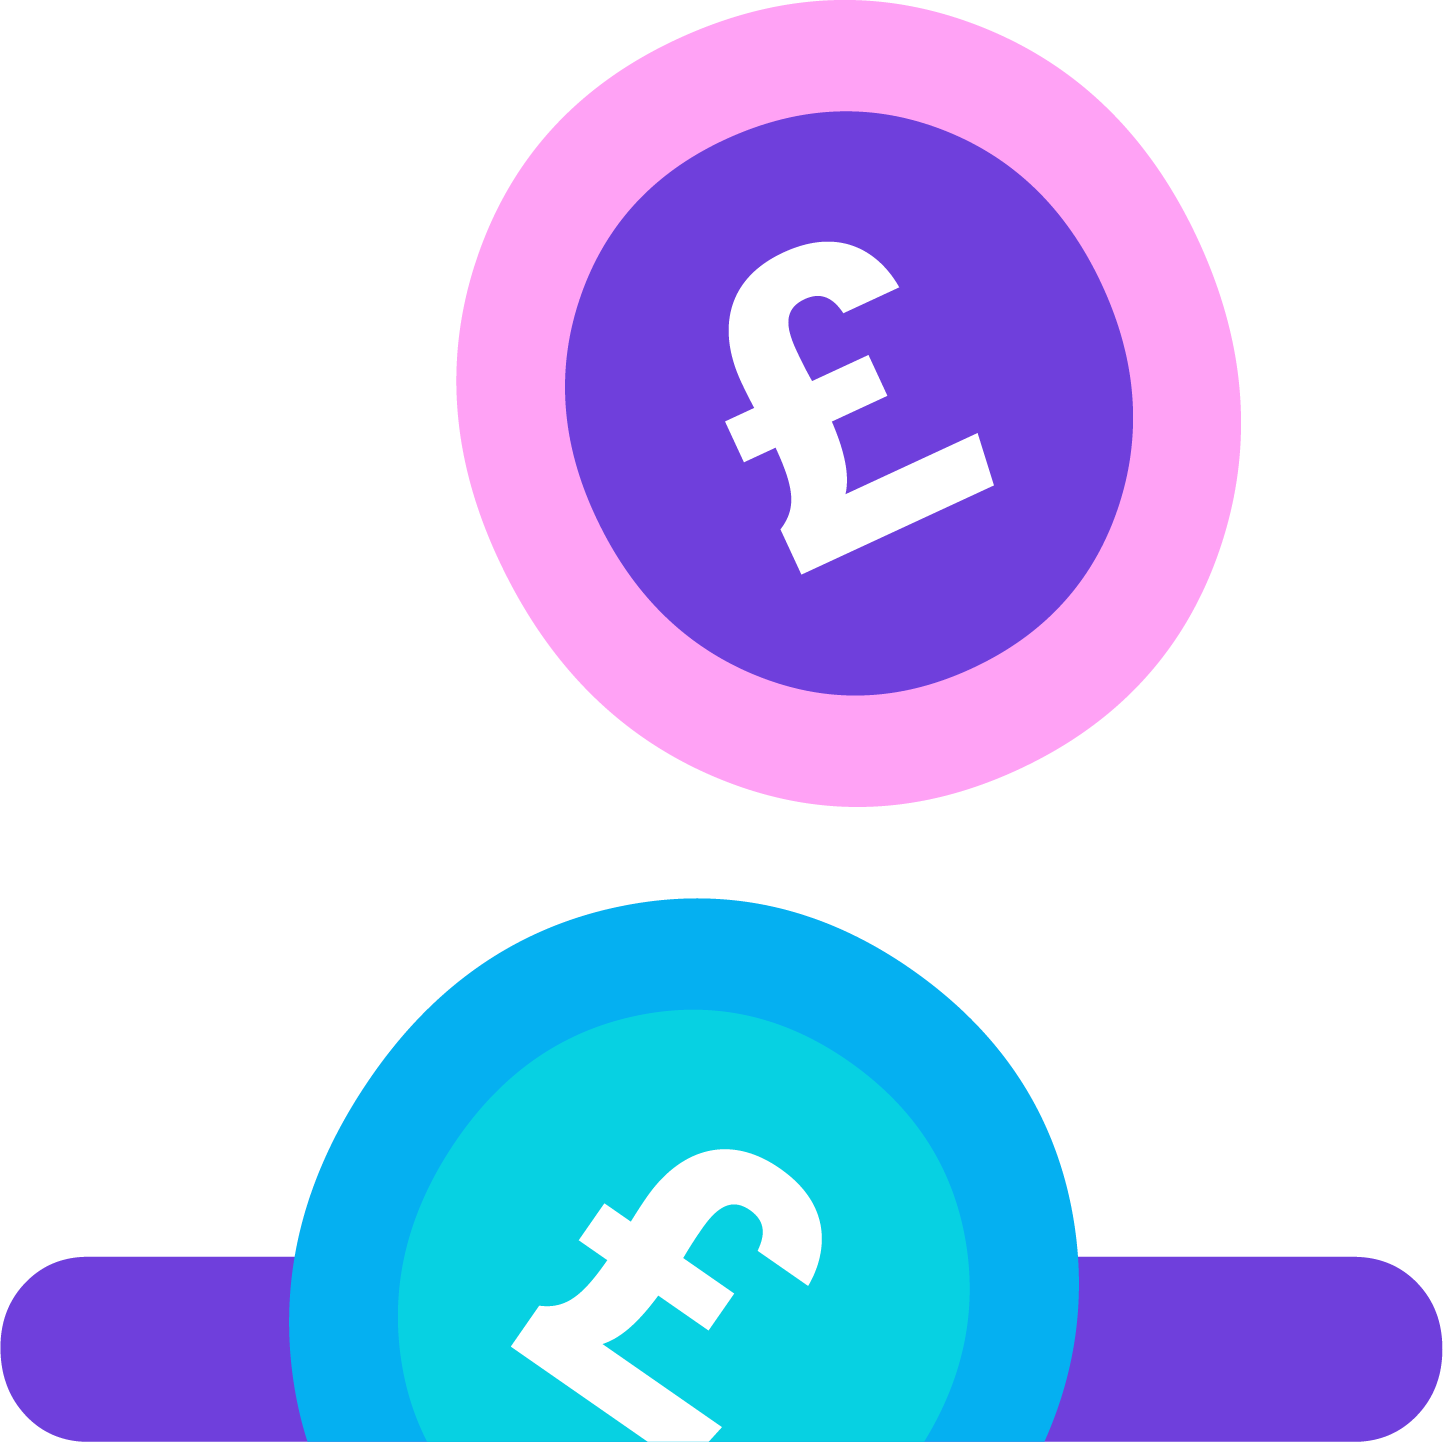 An icon to illustrate the importance of getting your pricing right in The Wow Accountancy Company's brand colours.